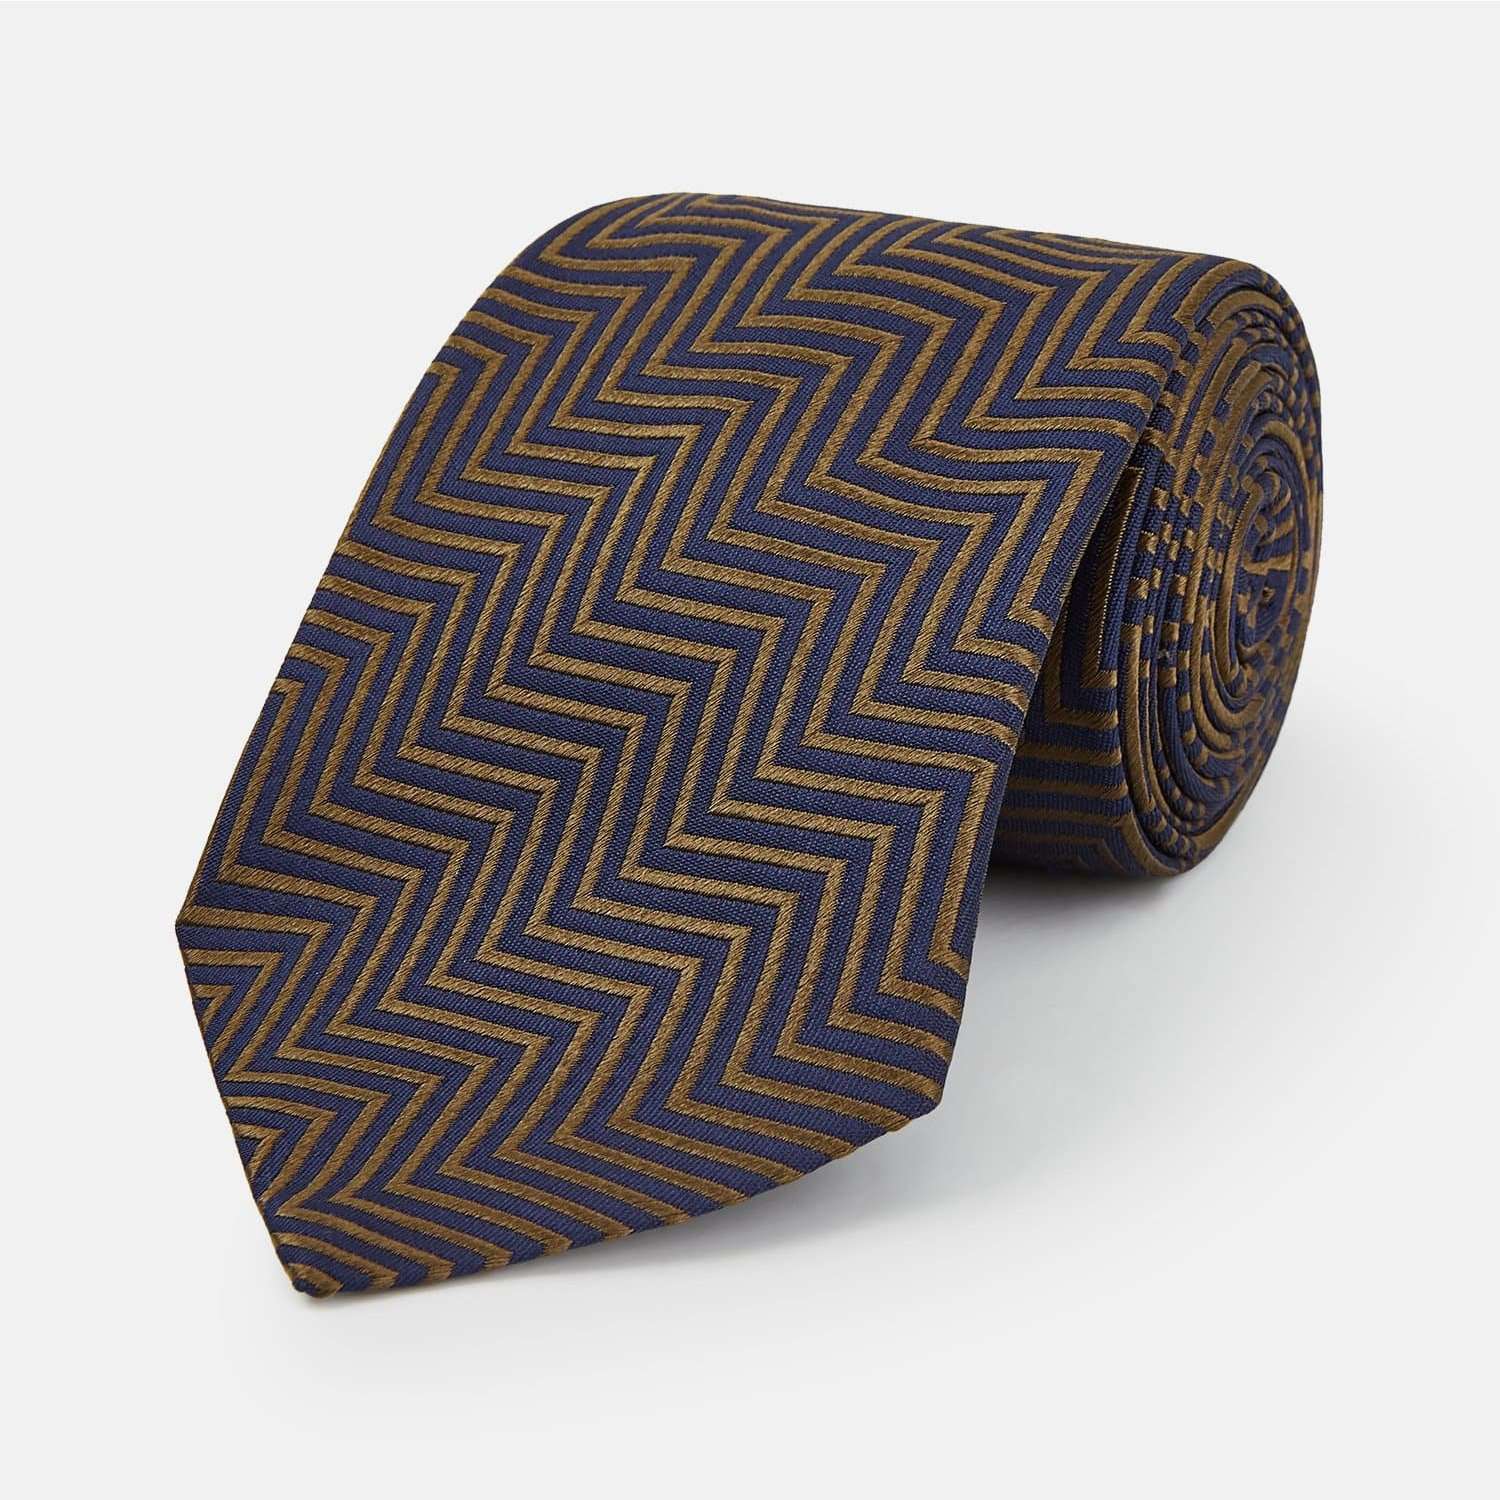 Zig Zag Silk Tie - The World Is Not Enough - By Turnbull & Asser TIE Turnbull & Asser 